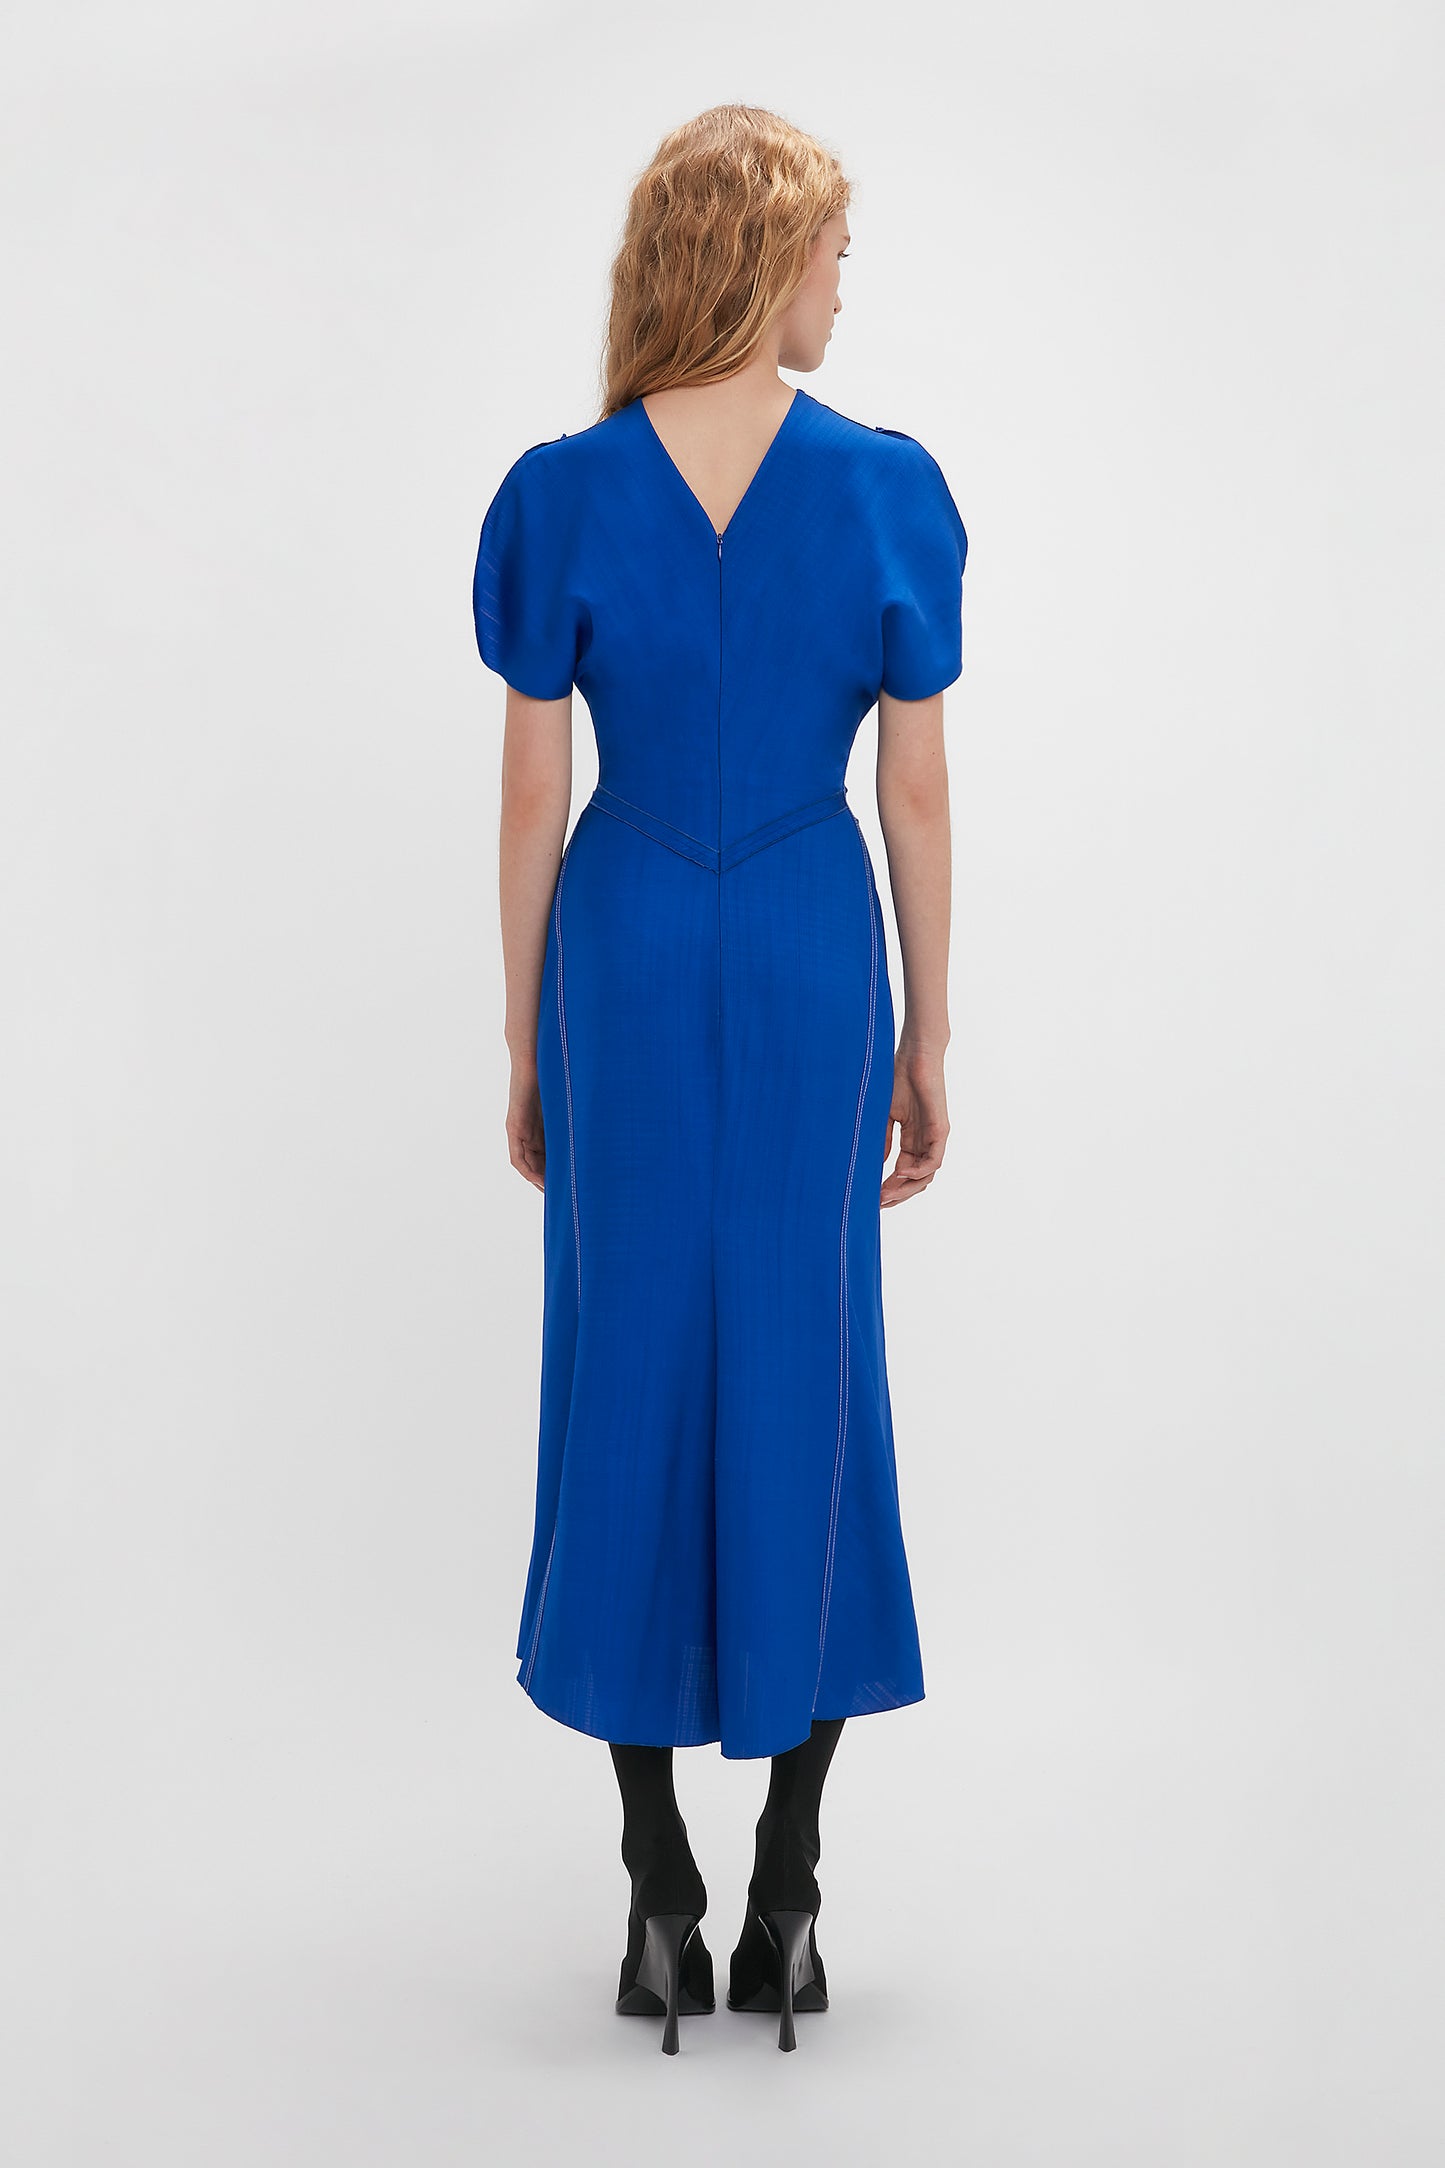 Woman in a Victoria Beckham Palace Blue Gathered Waist Midi Dress and black heels standing with her back to the camera against a white background.